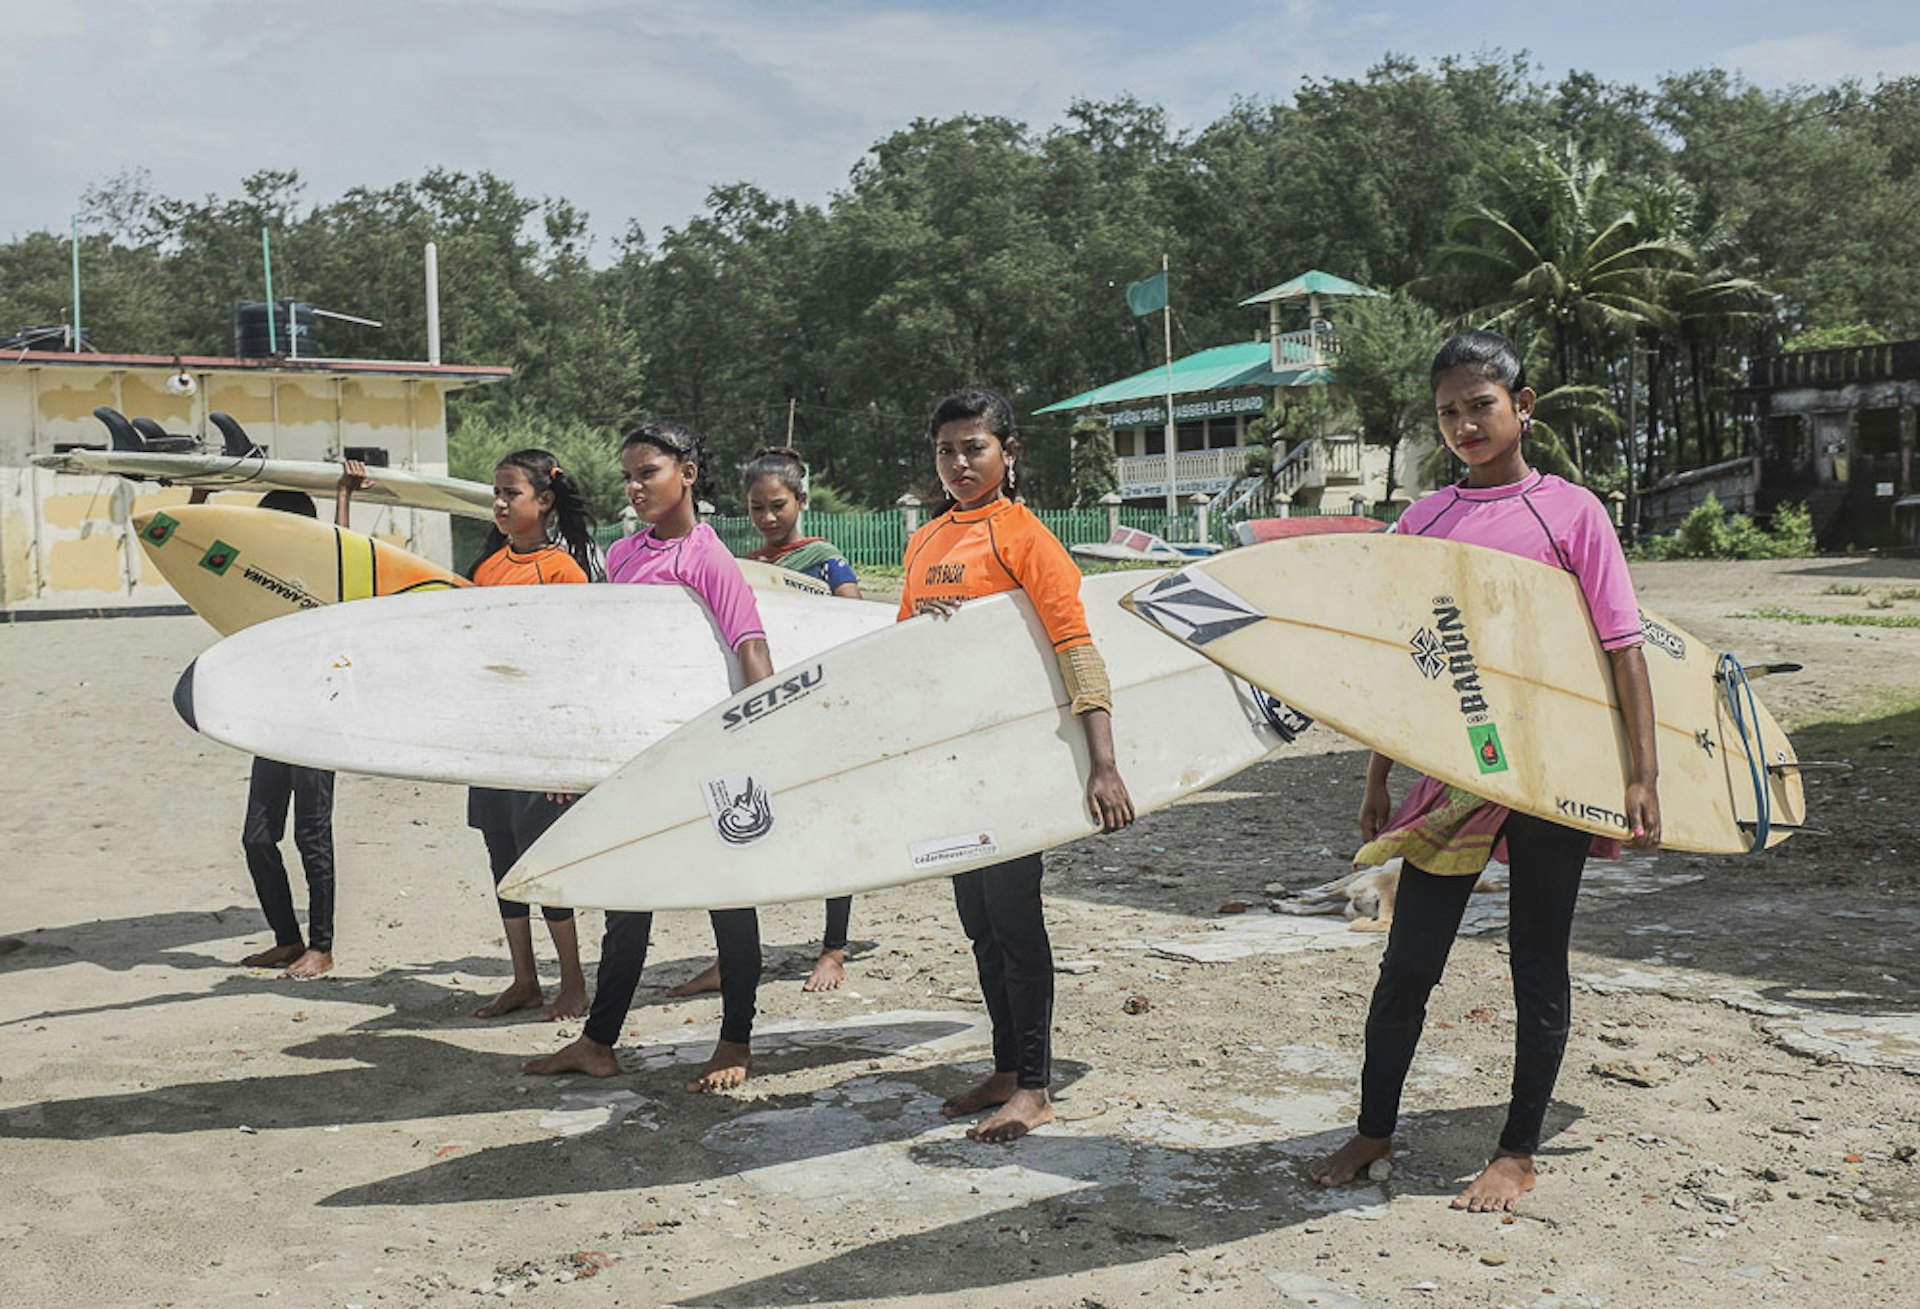 The girls are getting ready for surfing at Cox's Bazar's beach, Bangladesh